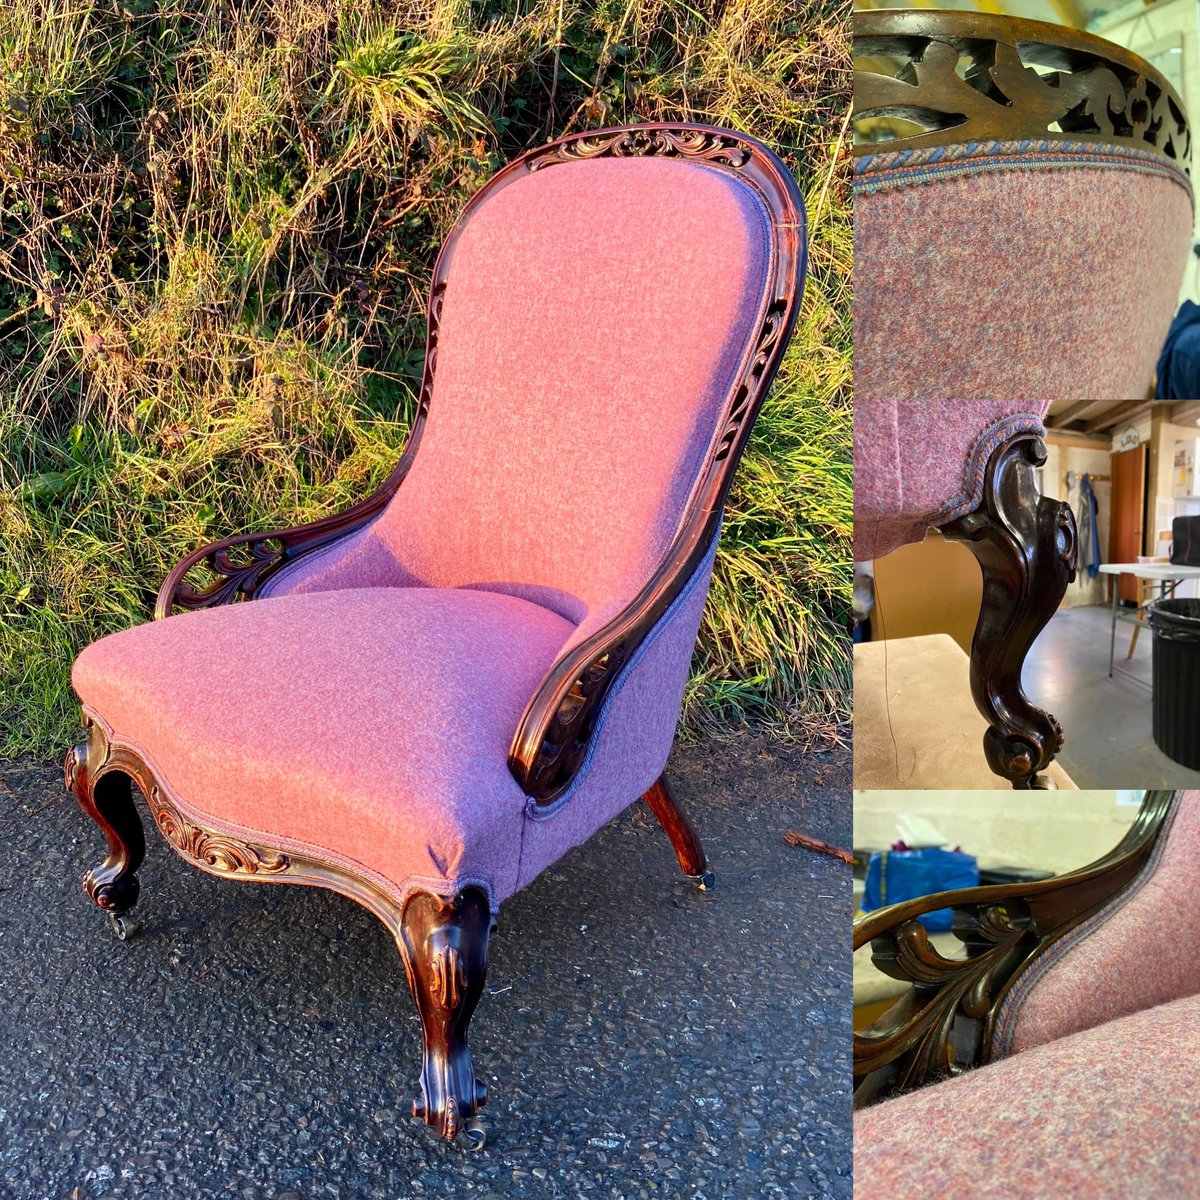 Laura’s stage 2 nursing chair is brilliant! What a great upholstery job and what a fabulous antique, restored to it’s former glory @THE_AMUSF upholsterycourses.com @AbrahamMoonSons wool looking very cosy in the setting sun. #visitwales #traditionalupholstery